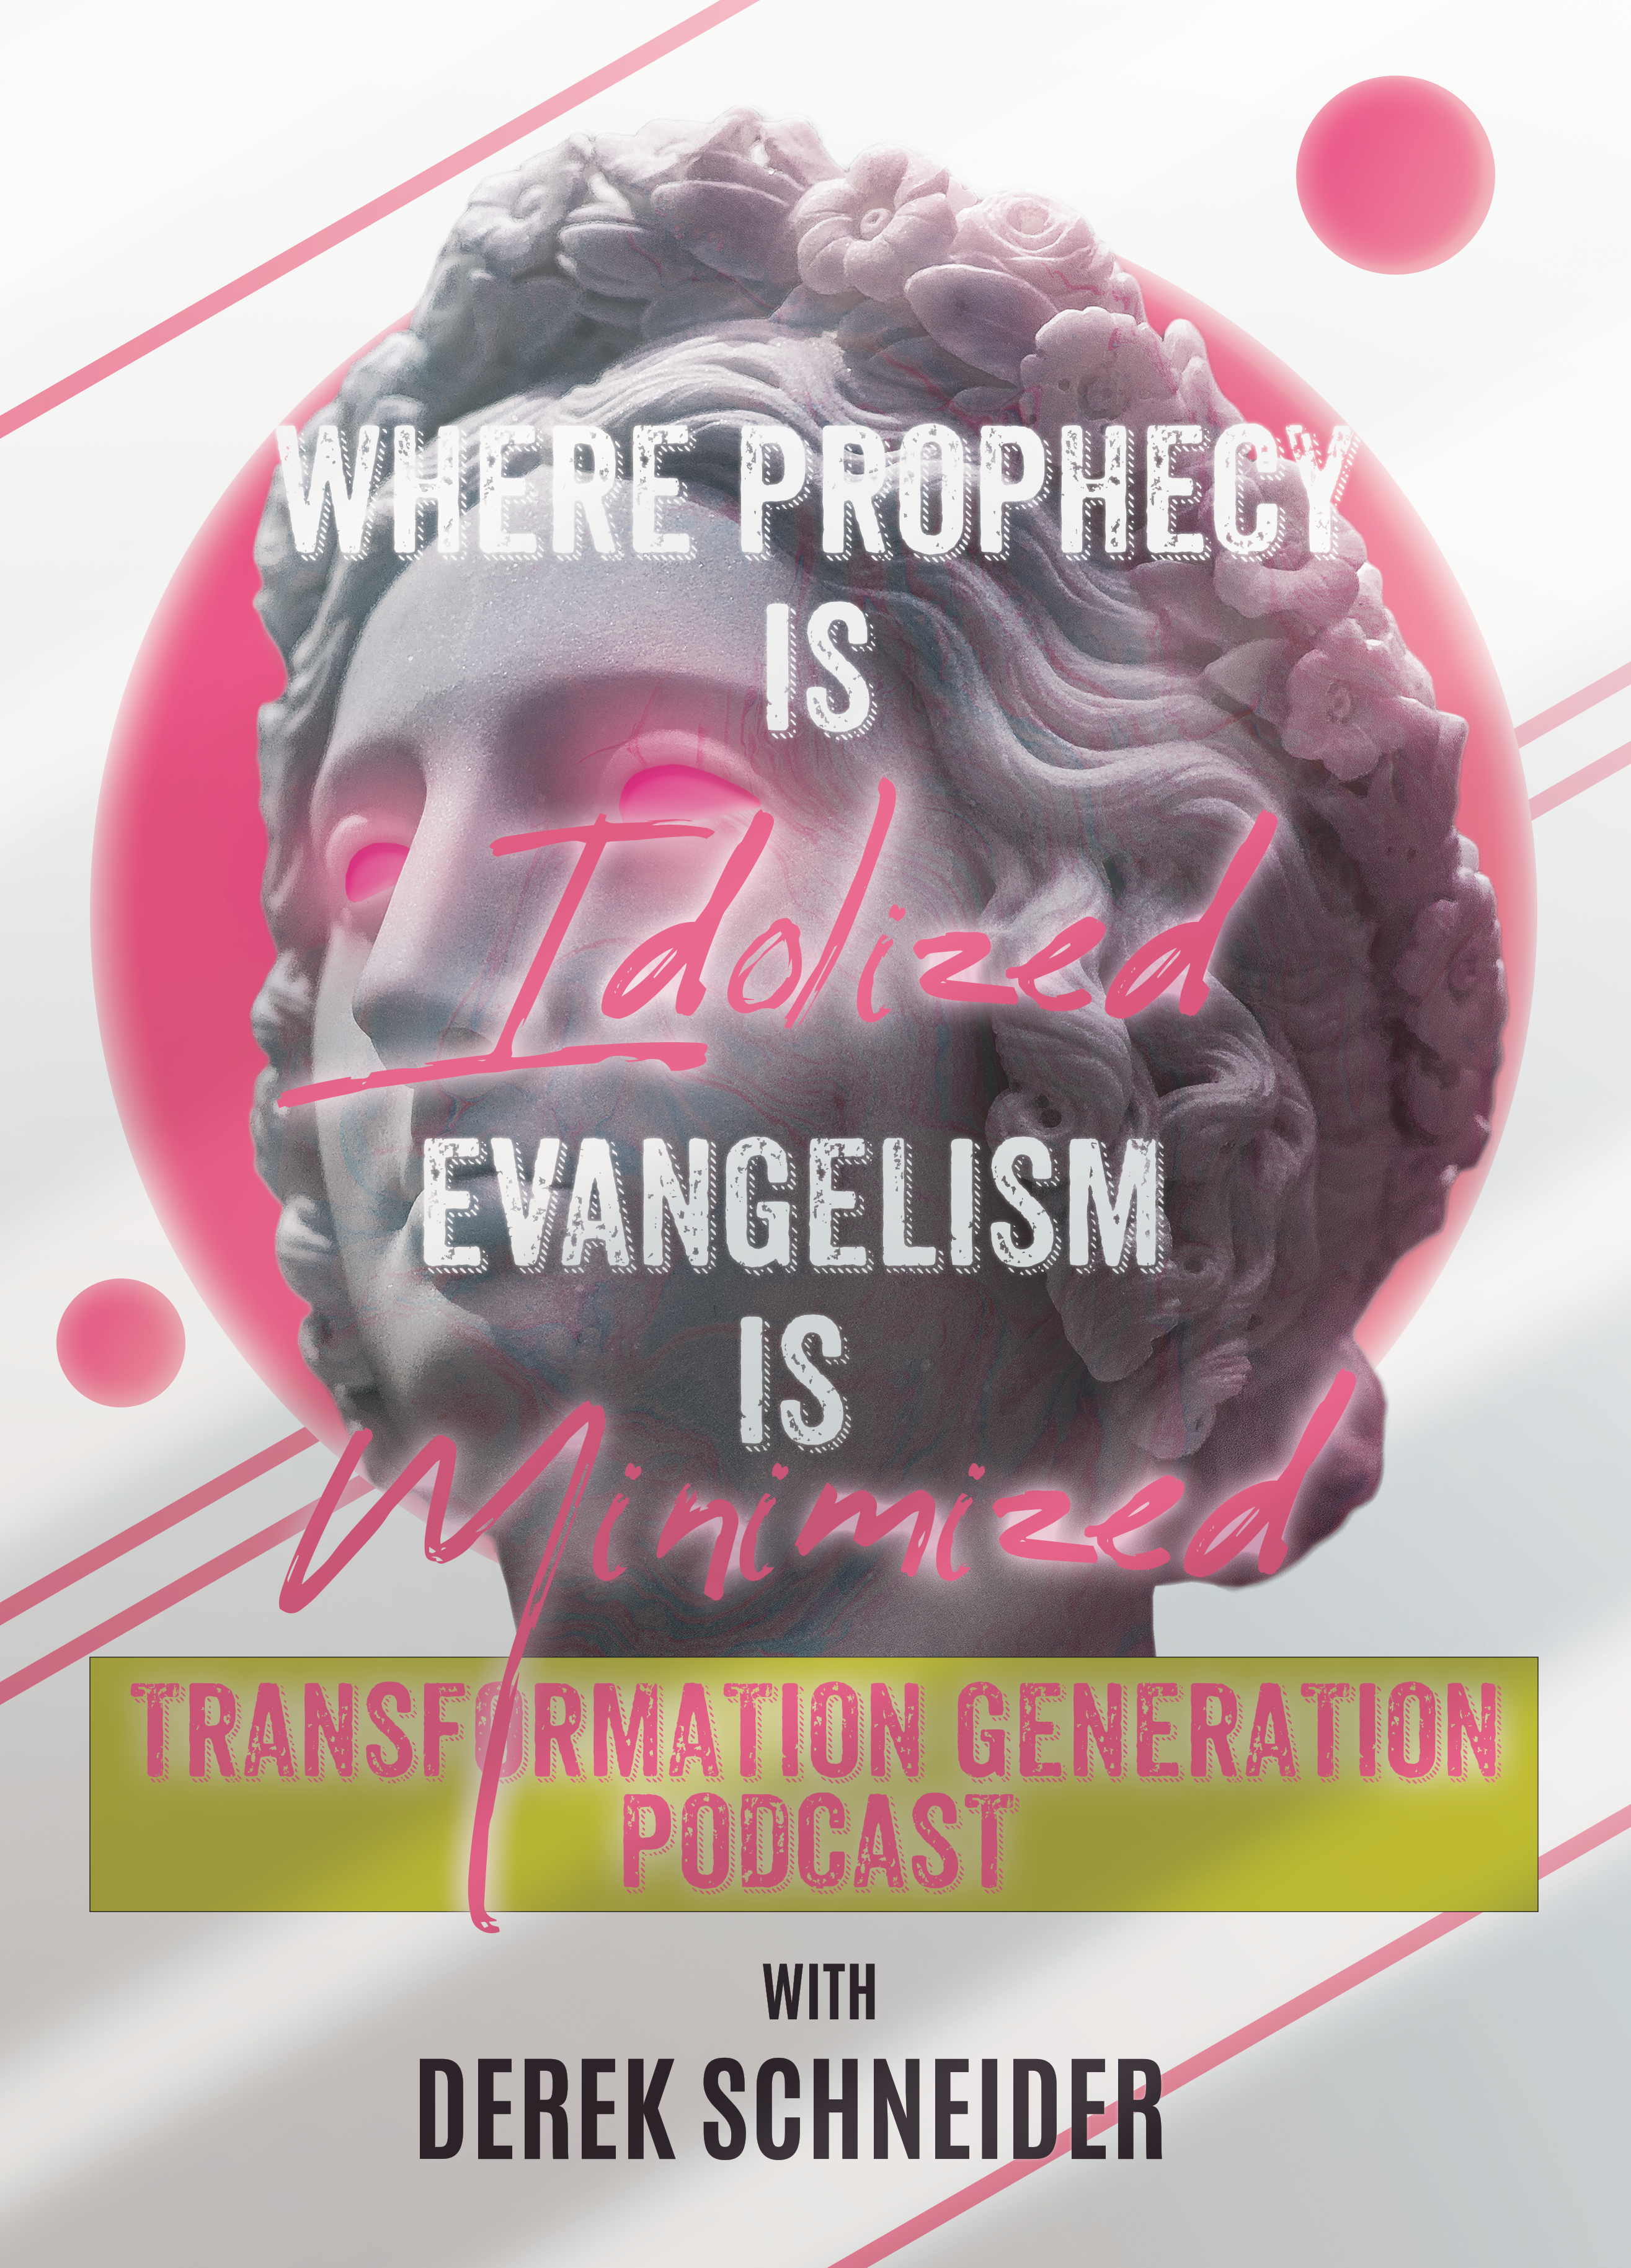 Where prophecy is idolized, Evangelism is Minimized